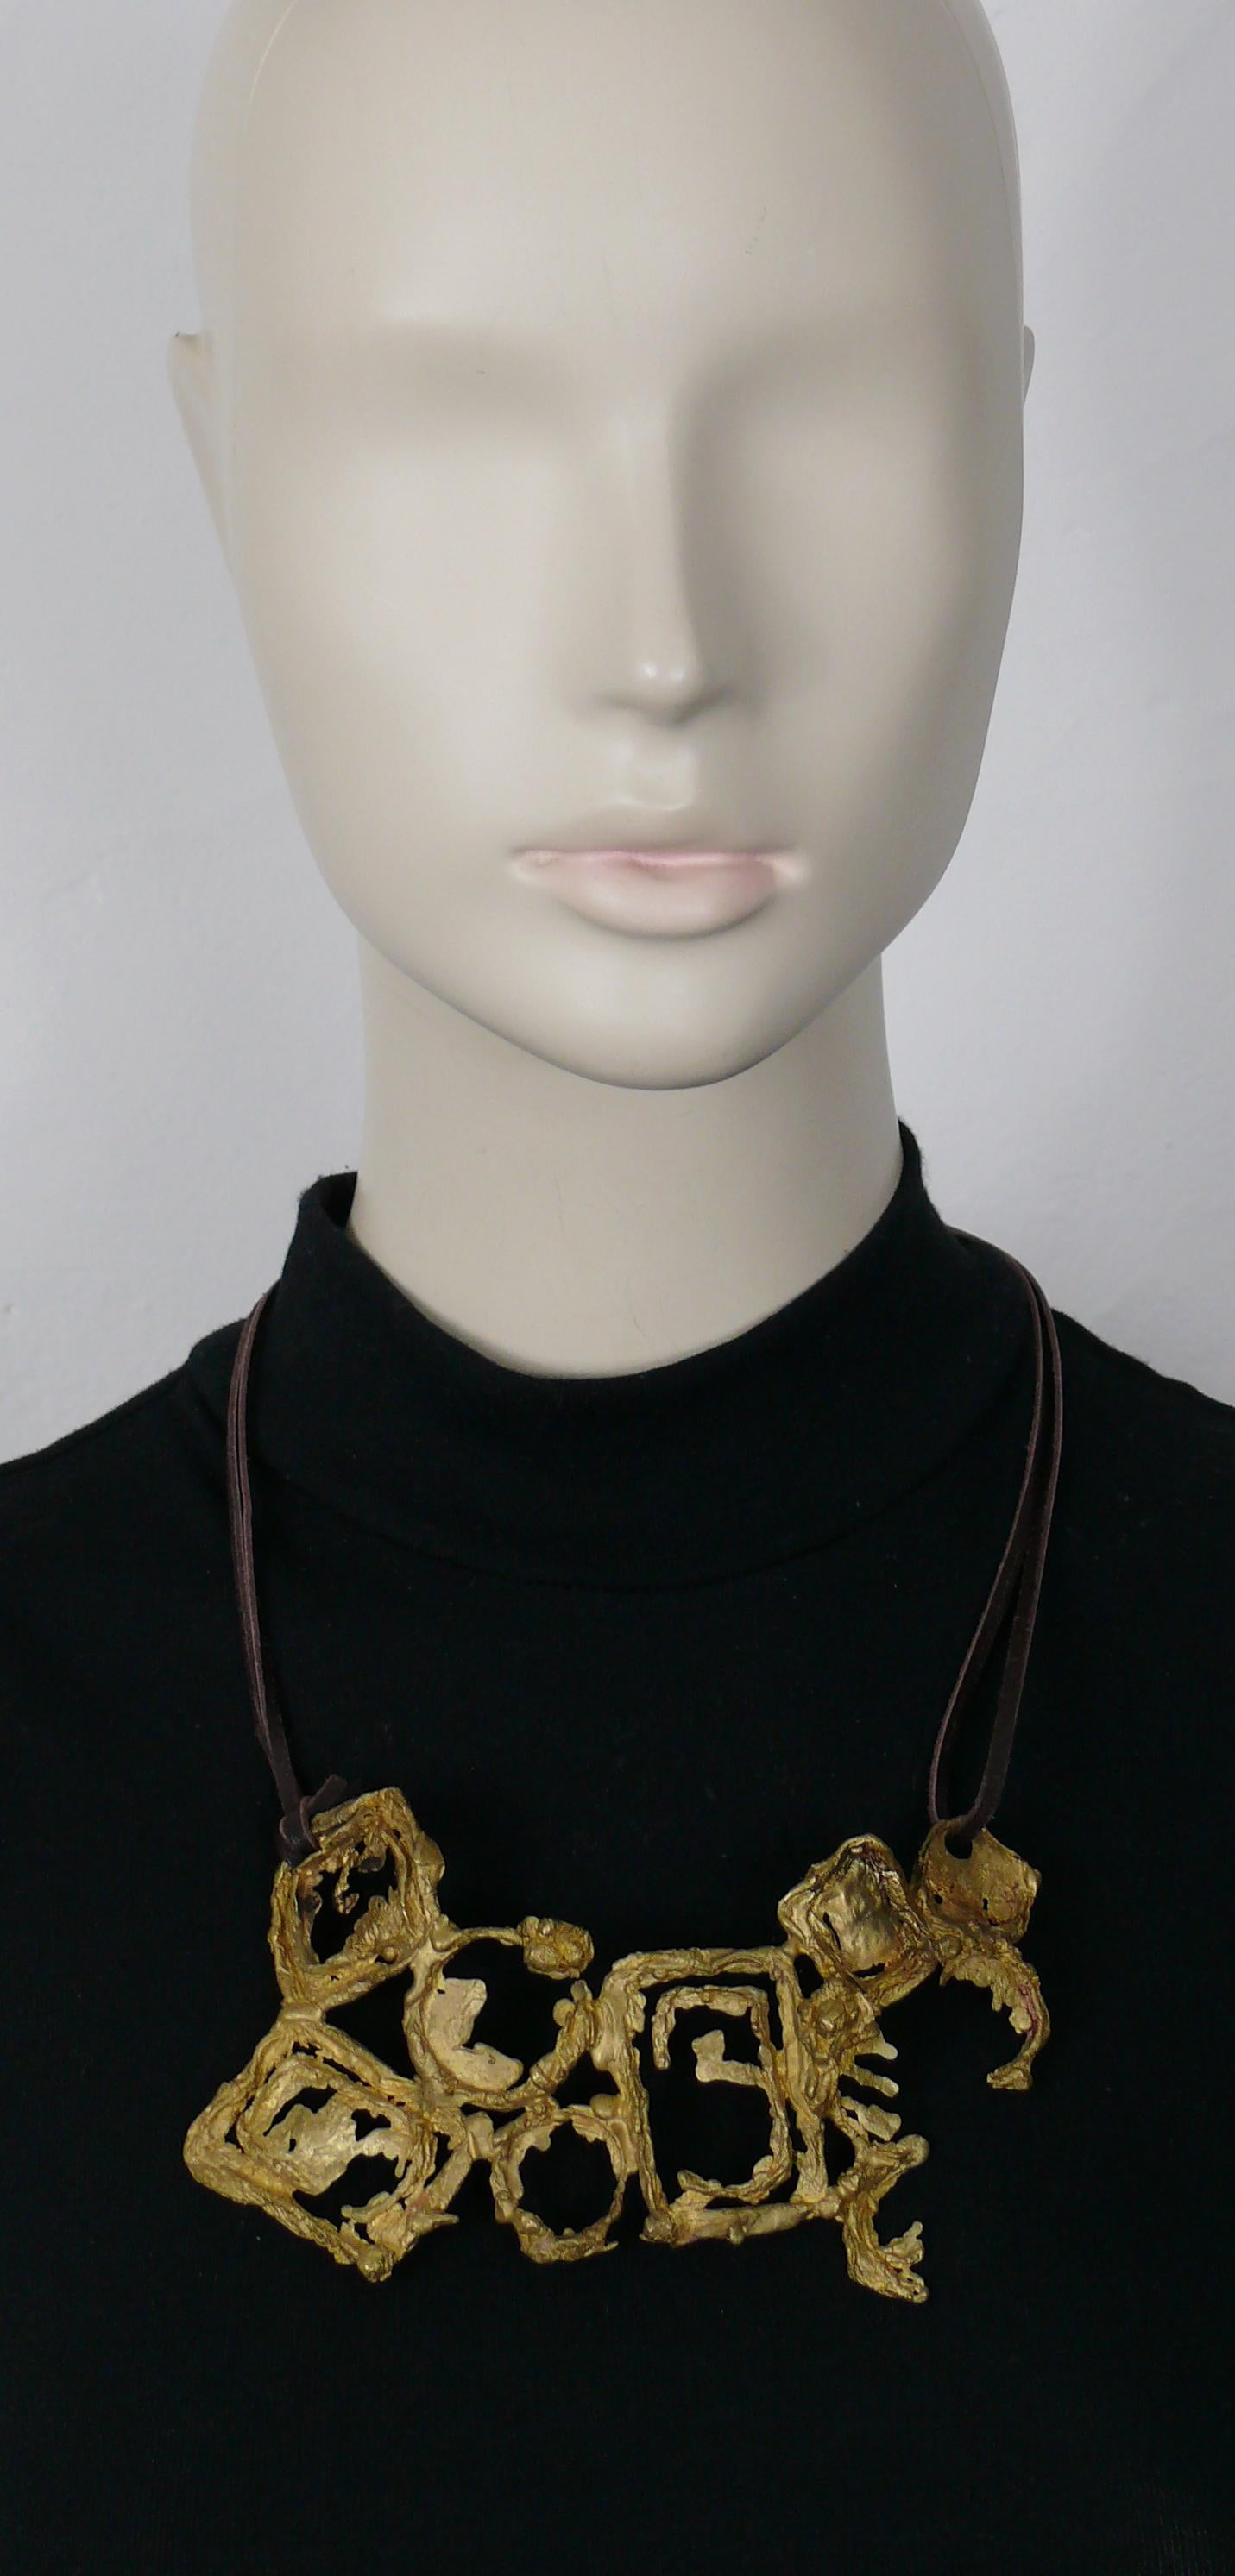 CHRISTIAN LACROIX by CHRISTIANE BILLET vintage oxidized bronze tone sculptured brutalist necklace.

Brown leather strap (that knots to the metal piece to the desired length).

Marked CL Paris CHRISTIAN LACROIX.

Material : Oxidized bronze tone